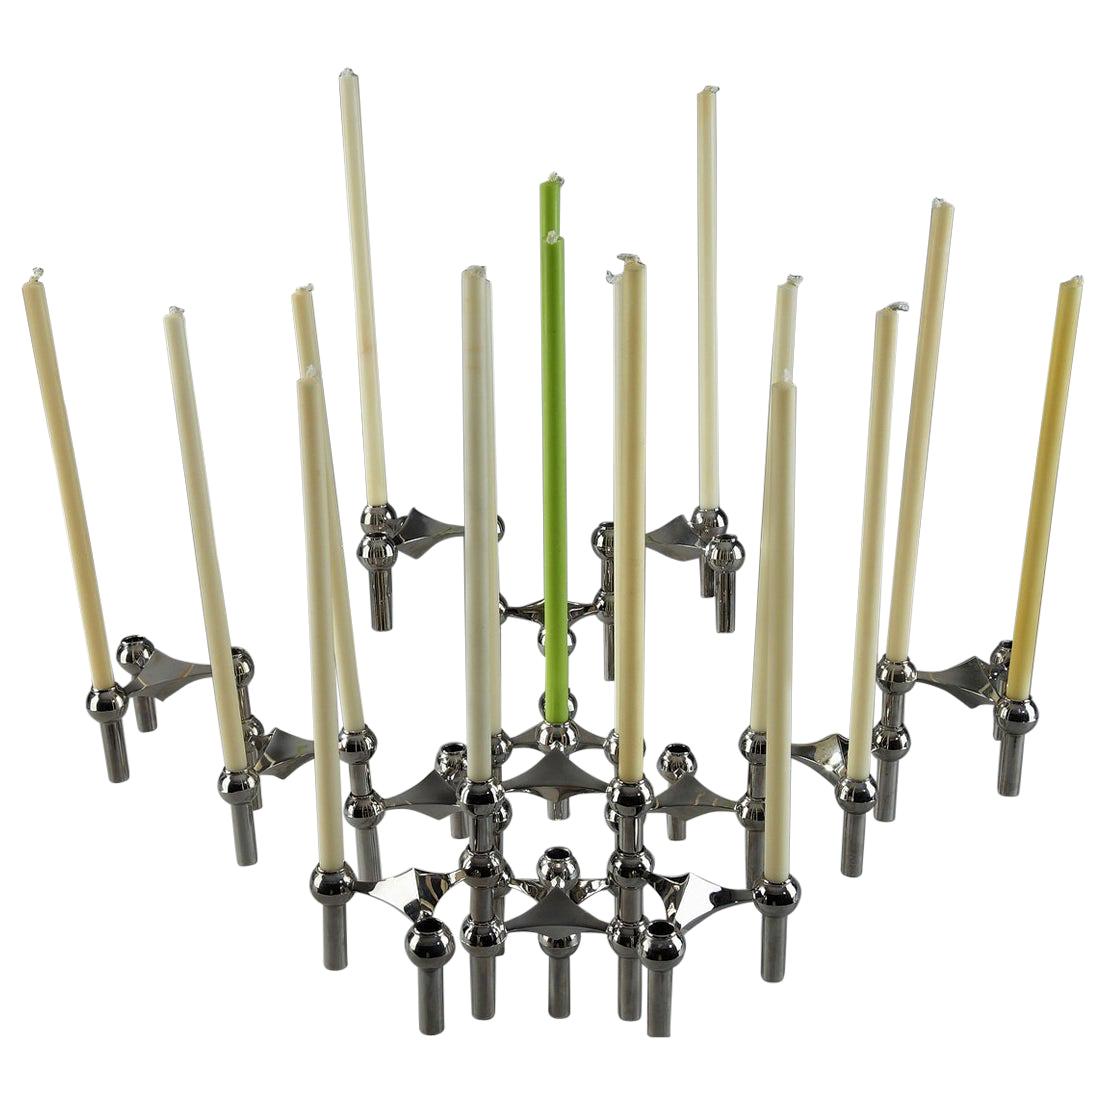 Set of 15 modular chromed metal stackable S22 candle holders and PVC jardinière edited by Nagel in the 1970s. This modular design can be configured in an endless number of ways both vertically and horizontally by stacking each interlocking piece.